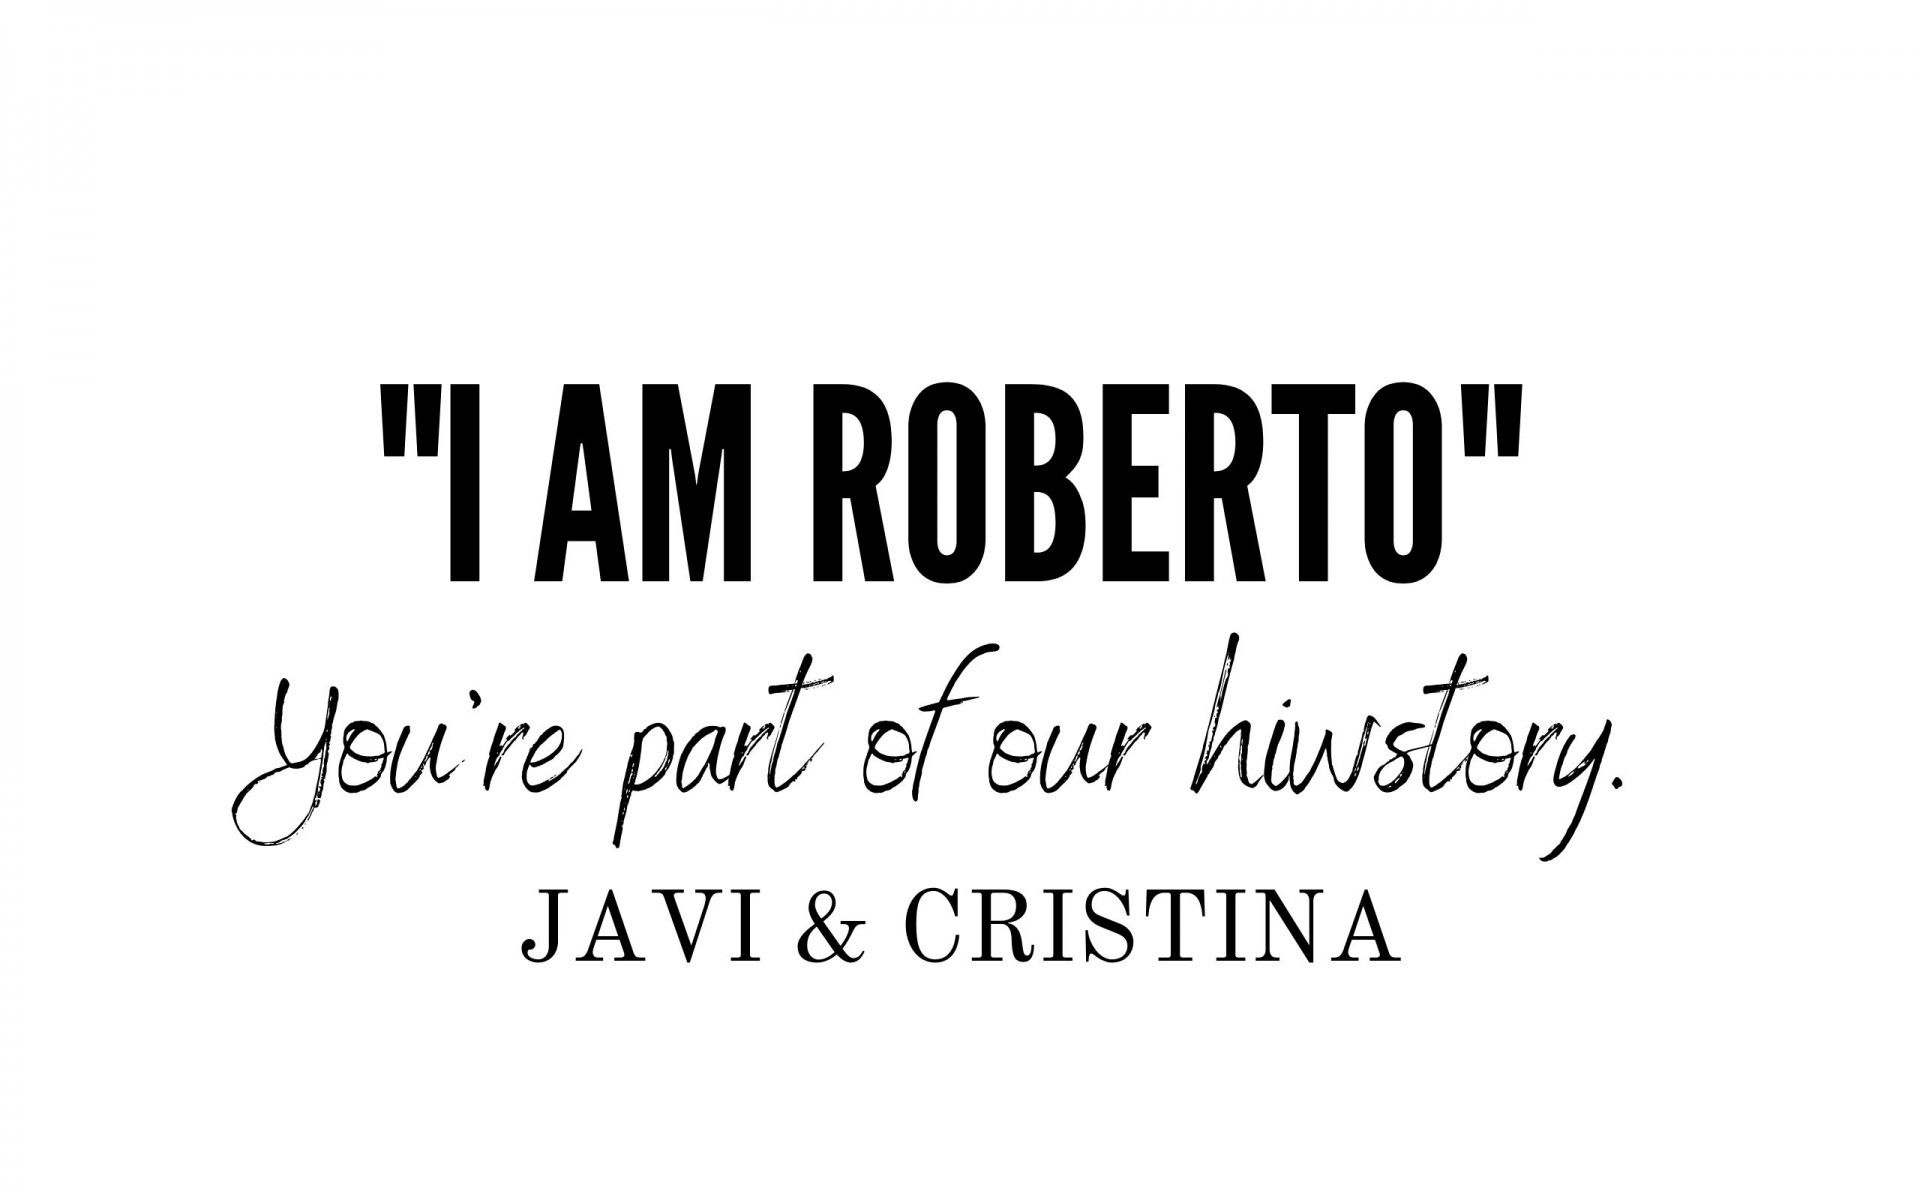 You are part of our history - Javi & Cristina